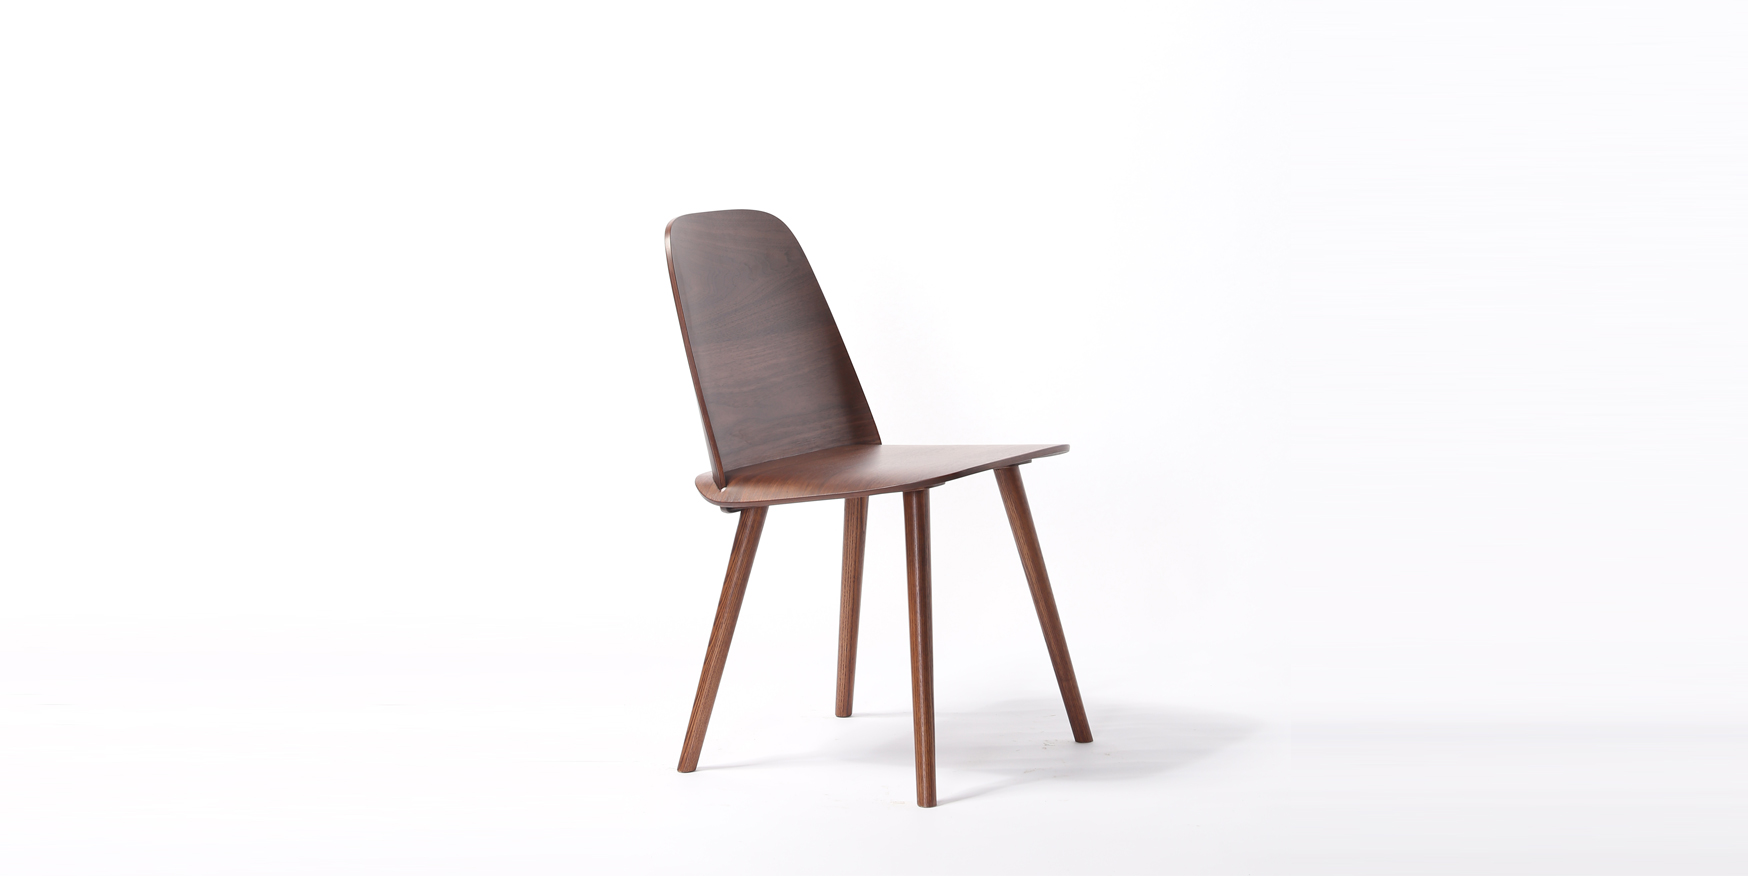 wooden chair for dining
